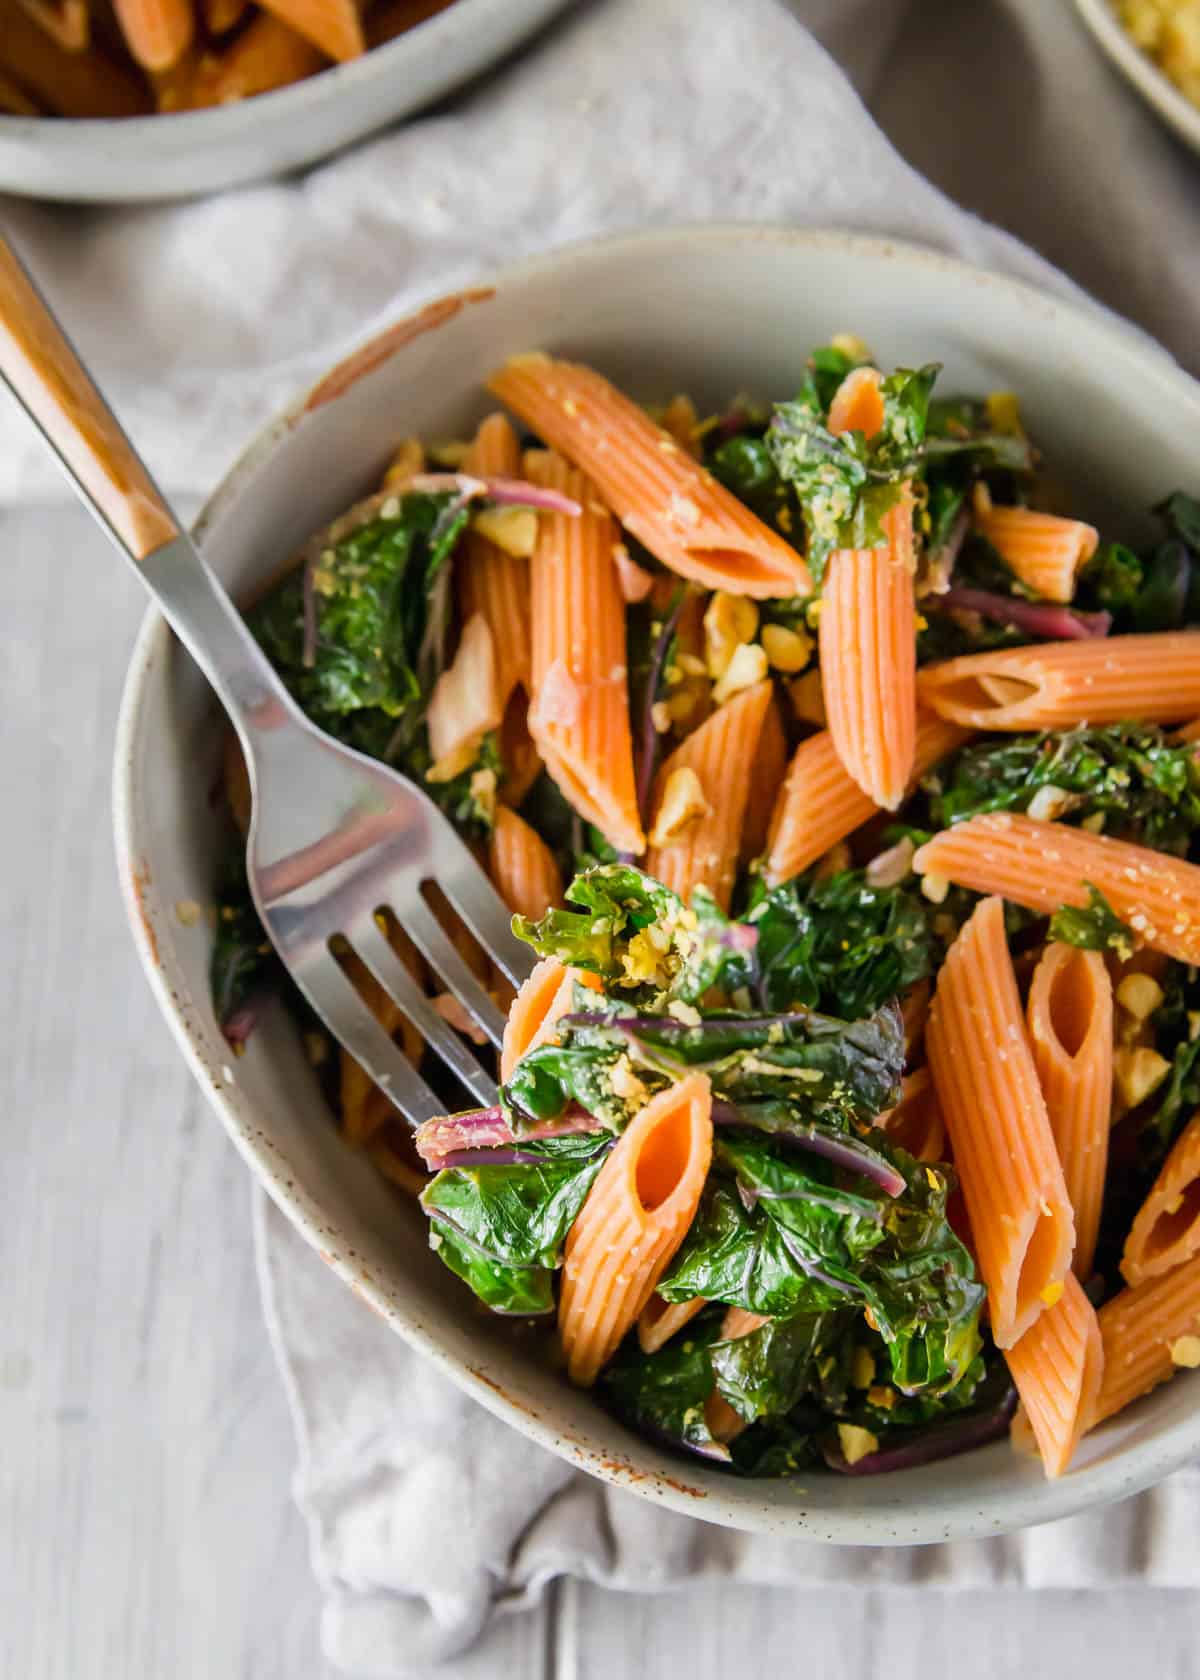 Red lentil pasta with greens in a bowl.